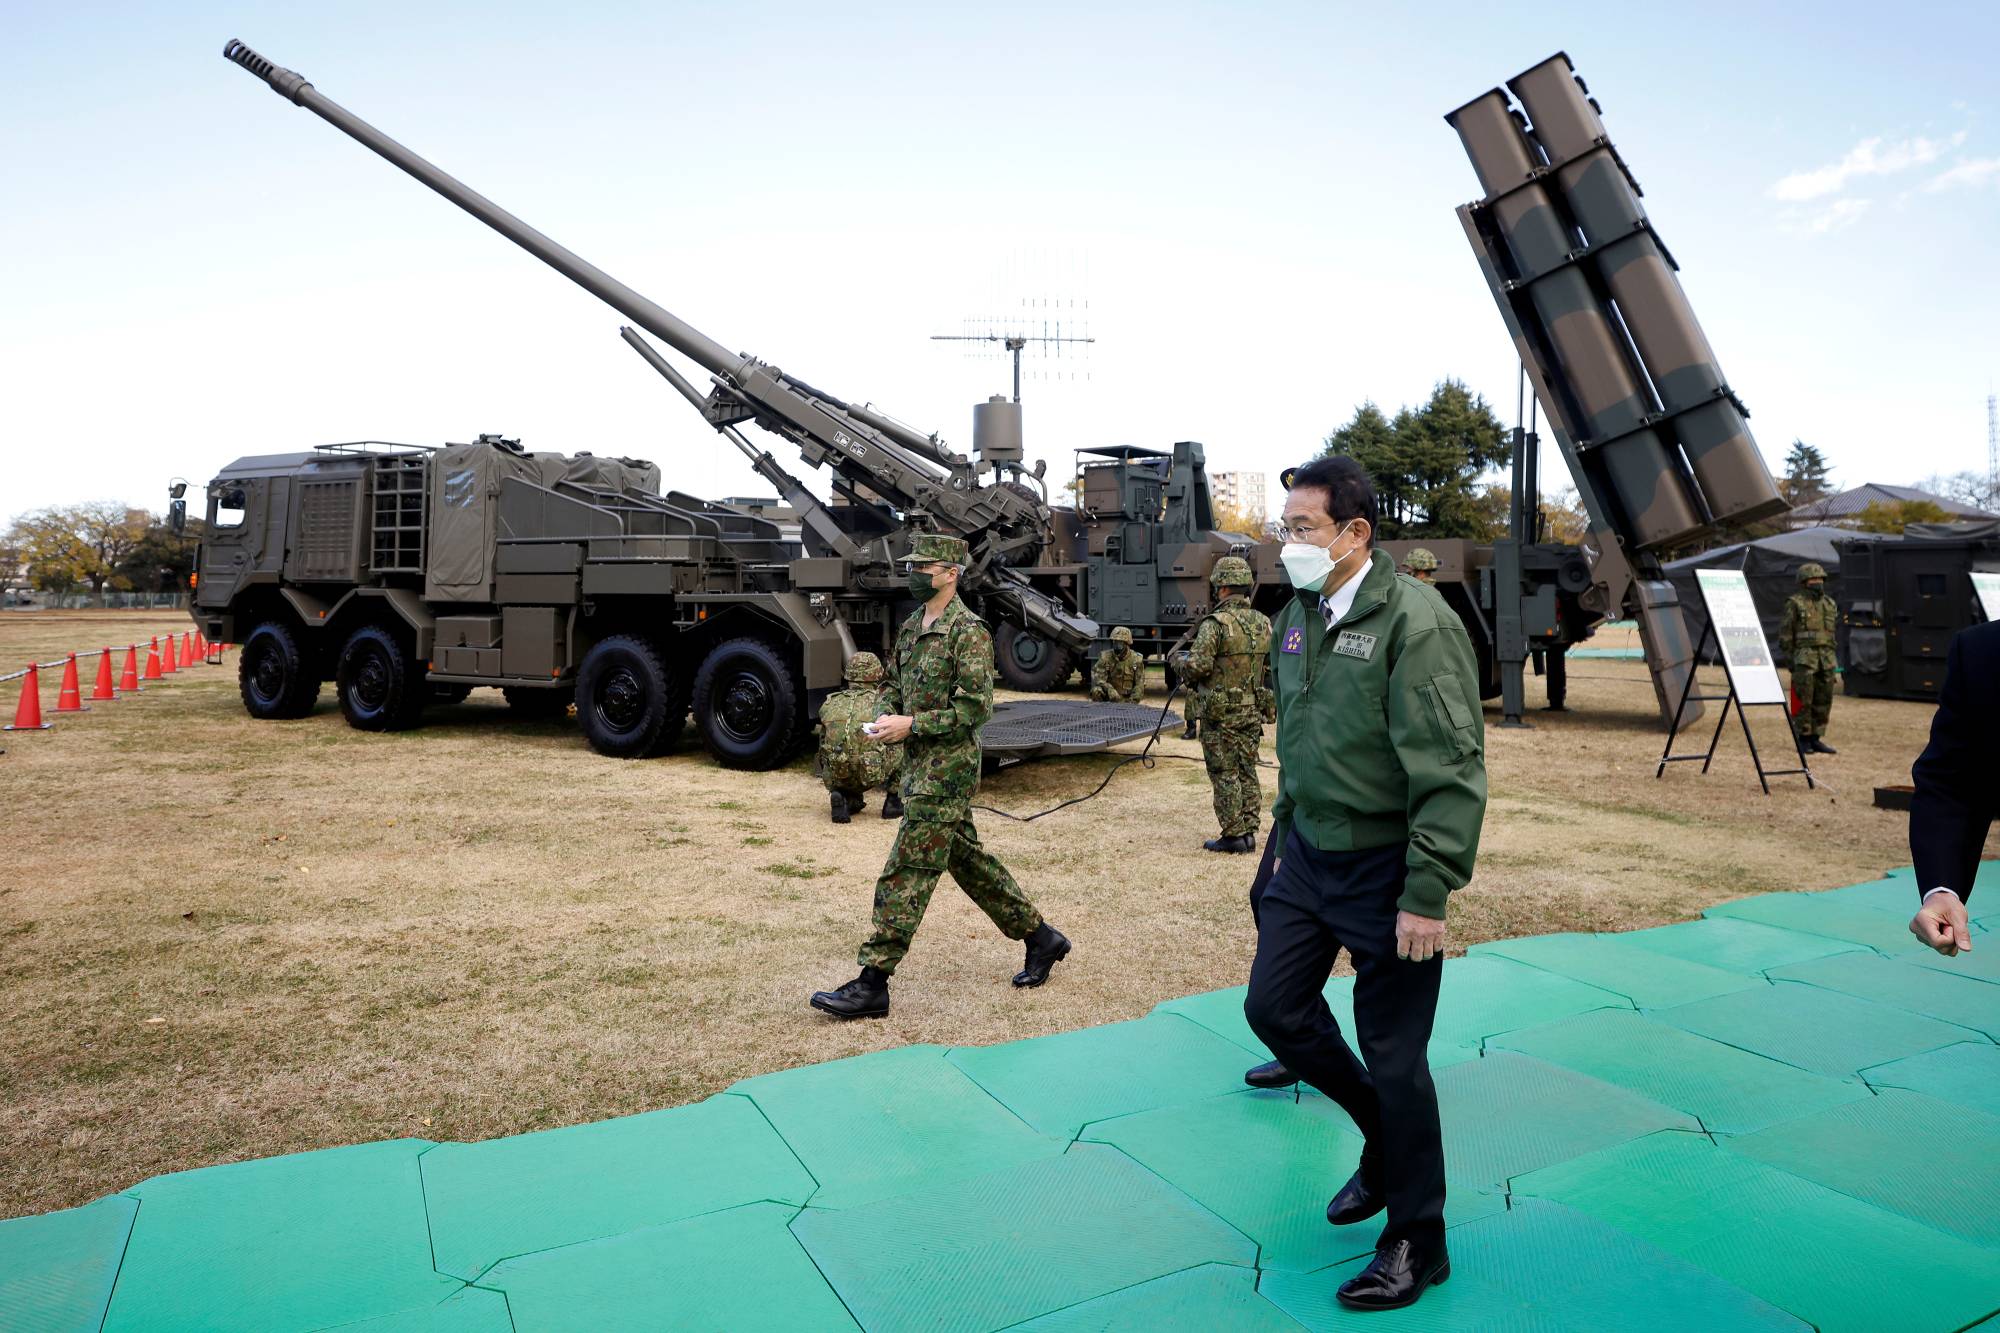 Prime Minister Fumio Kishida walks past a Ground Self-Defense Force Type-19 155 mm wheeled self-propelled howitzer and a Type-12 surface-to-ship missile as he inspects equipment during a review at the SDF's Camp Asaka in Tokyo in November 2021. | POOL / VIA REUTERS